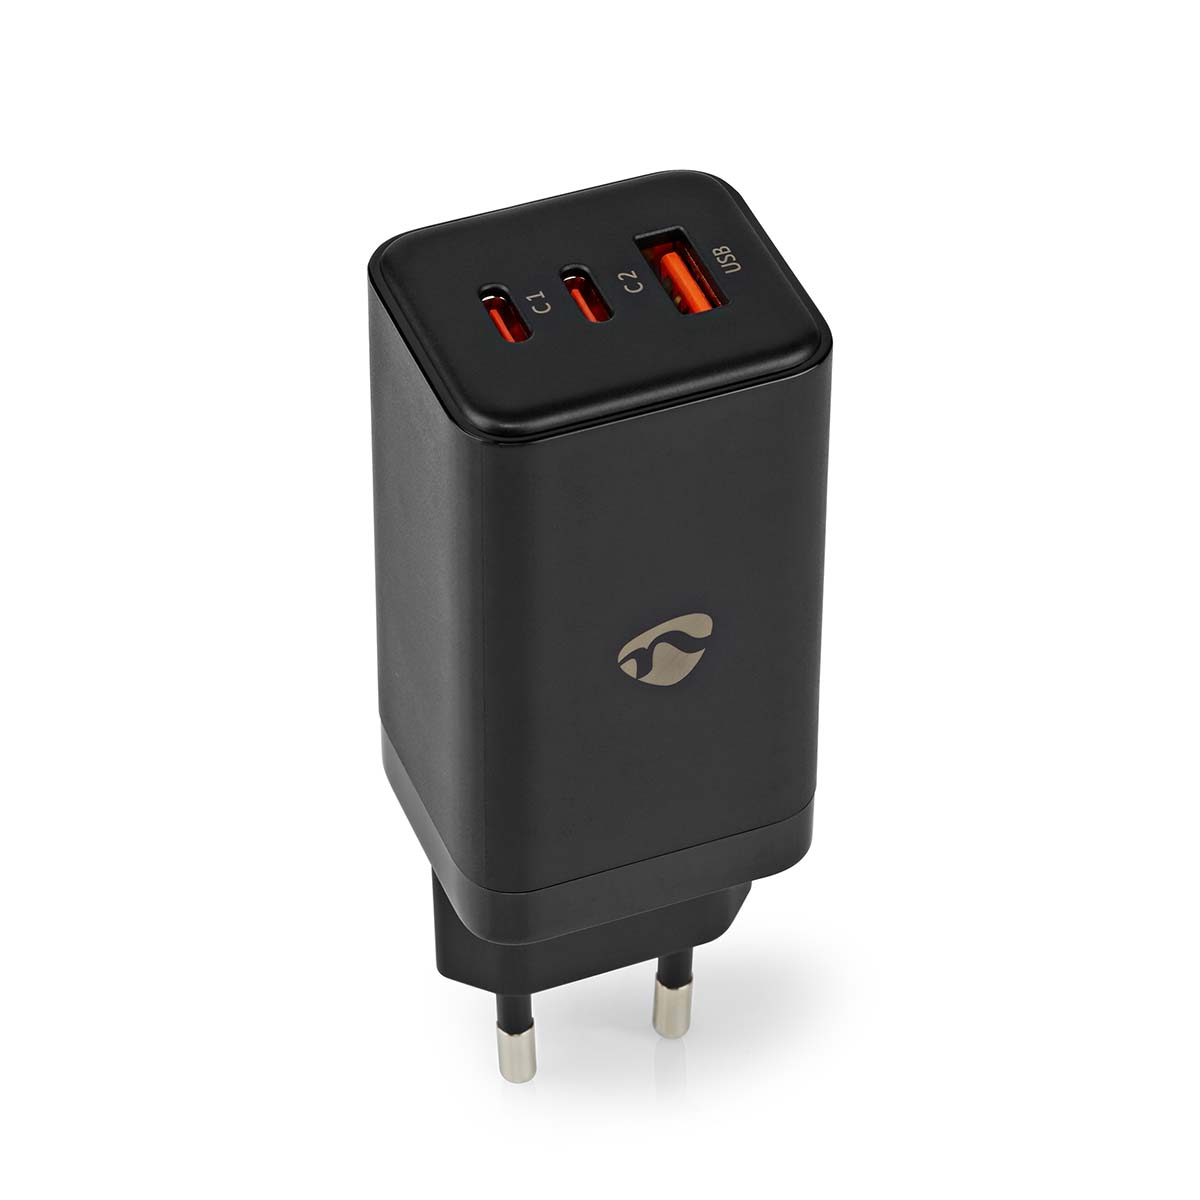 Chargeur mural GaN 65W USB-C Power Delivery ™ 3.0 & USB-A charge rapide  câble